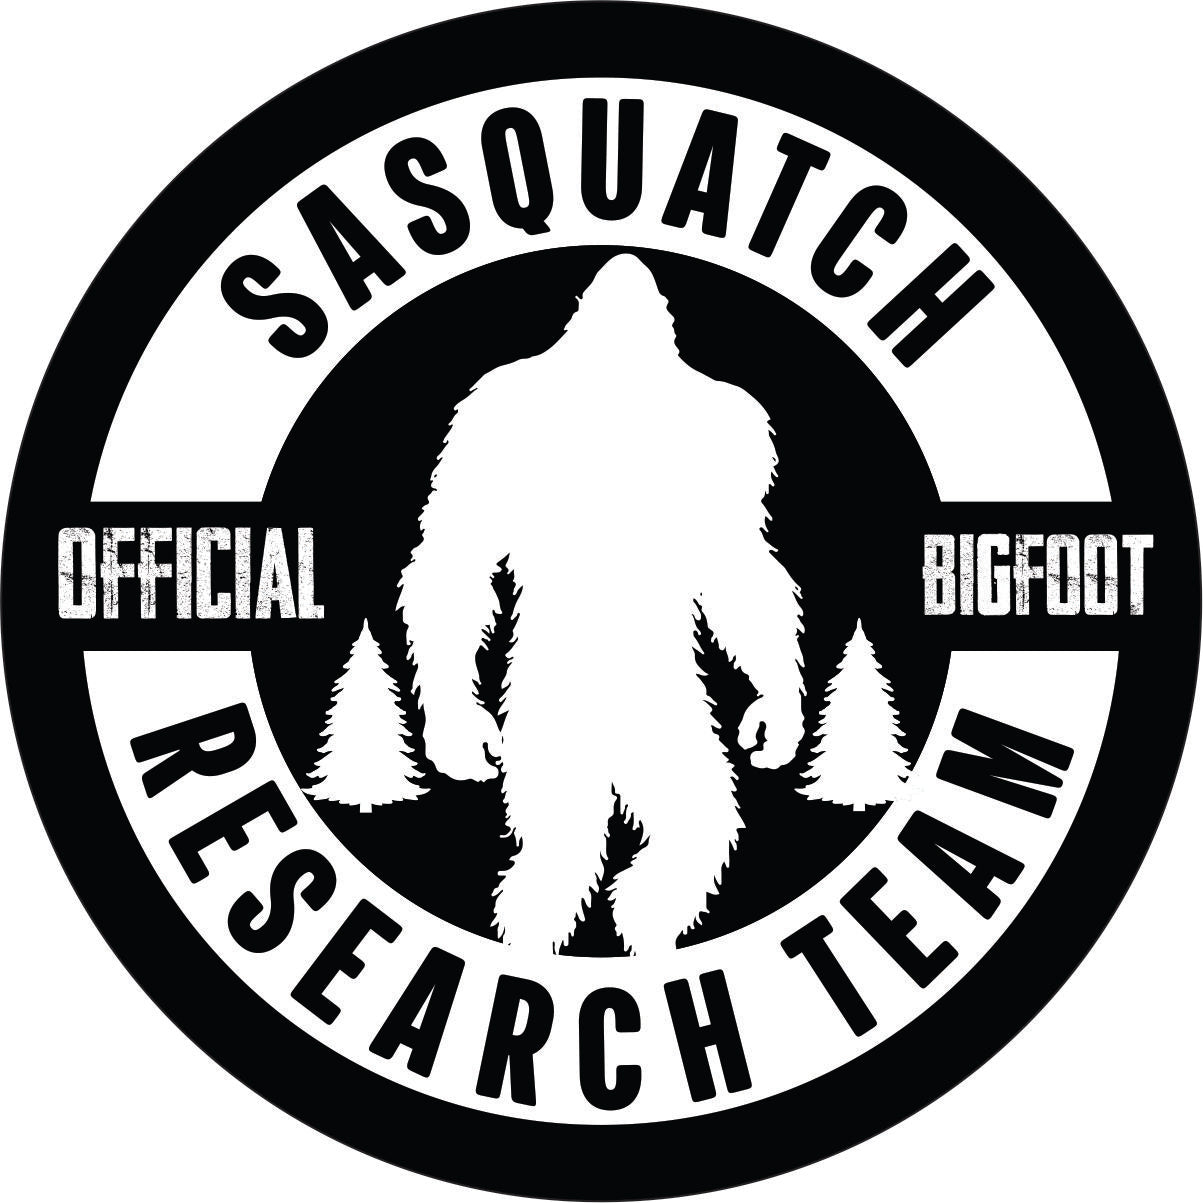 Official Bigfoot Sasquatch Research Team spare tire cover with a silhouette of bigfoot in the center.